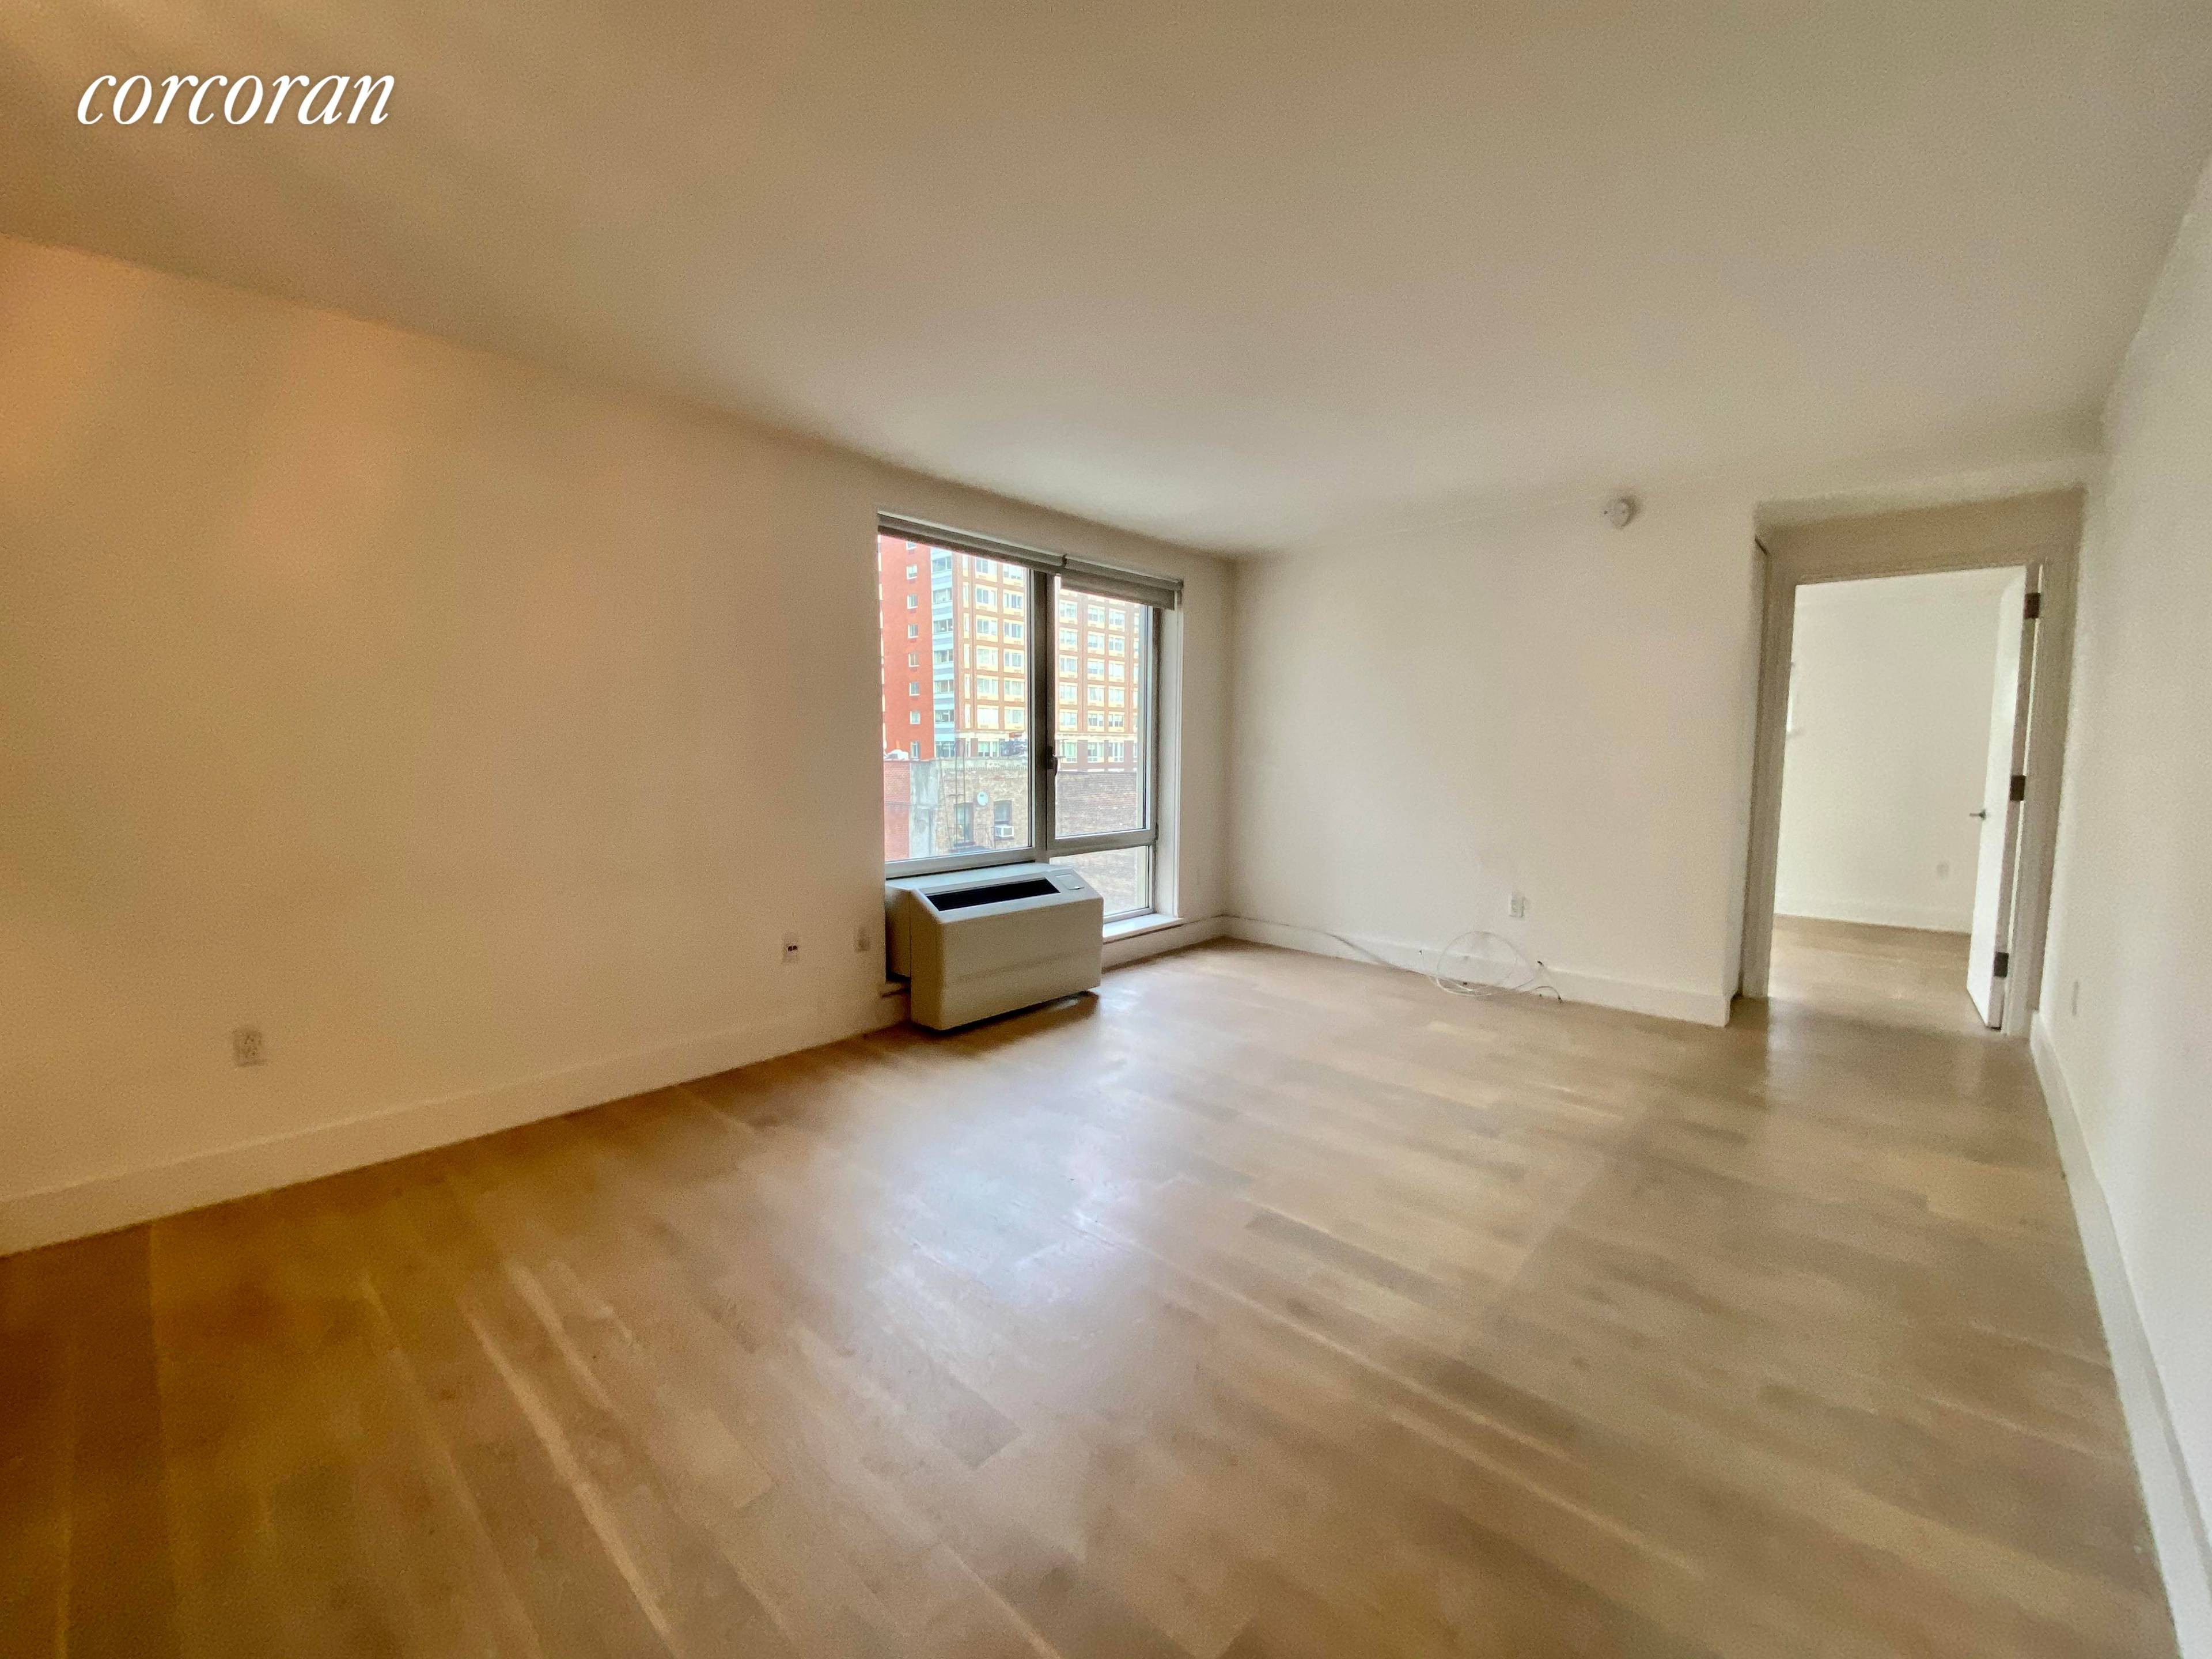 Gracious one bedroom layout featuring wide plank solid white oak floors, stainless steel appliances with paneled dishwasher, custom German kitchen cabinets with Caesarstone counter tops and Carrara marble backsplash, and ...